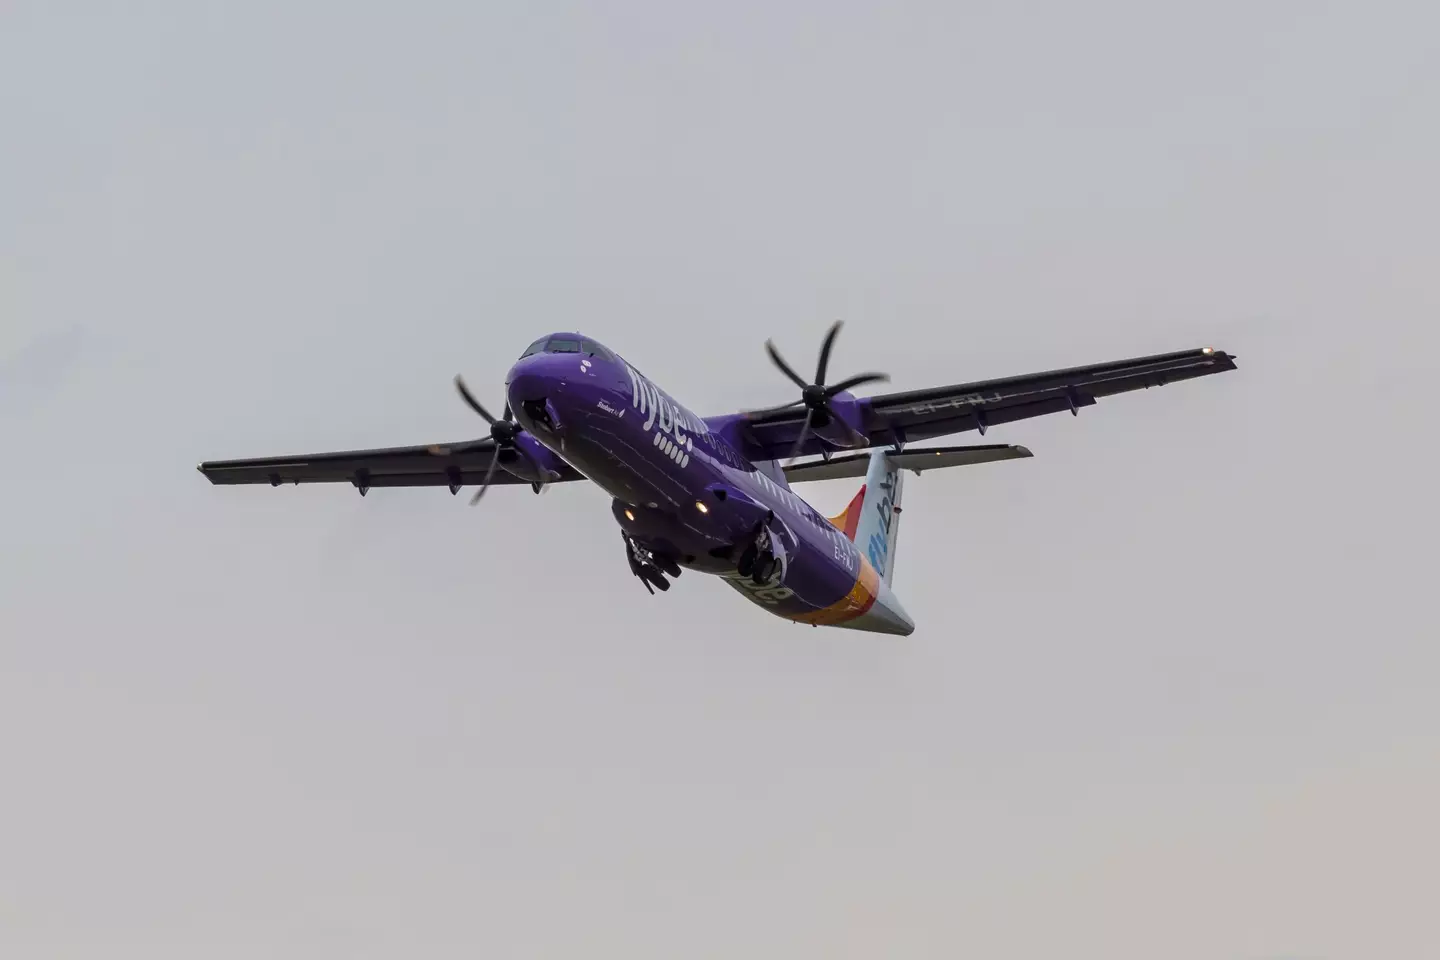 A FlyBe plane operated by StobartAir.